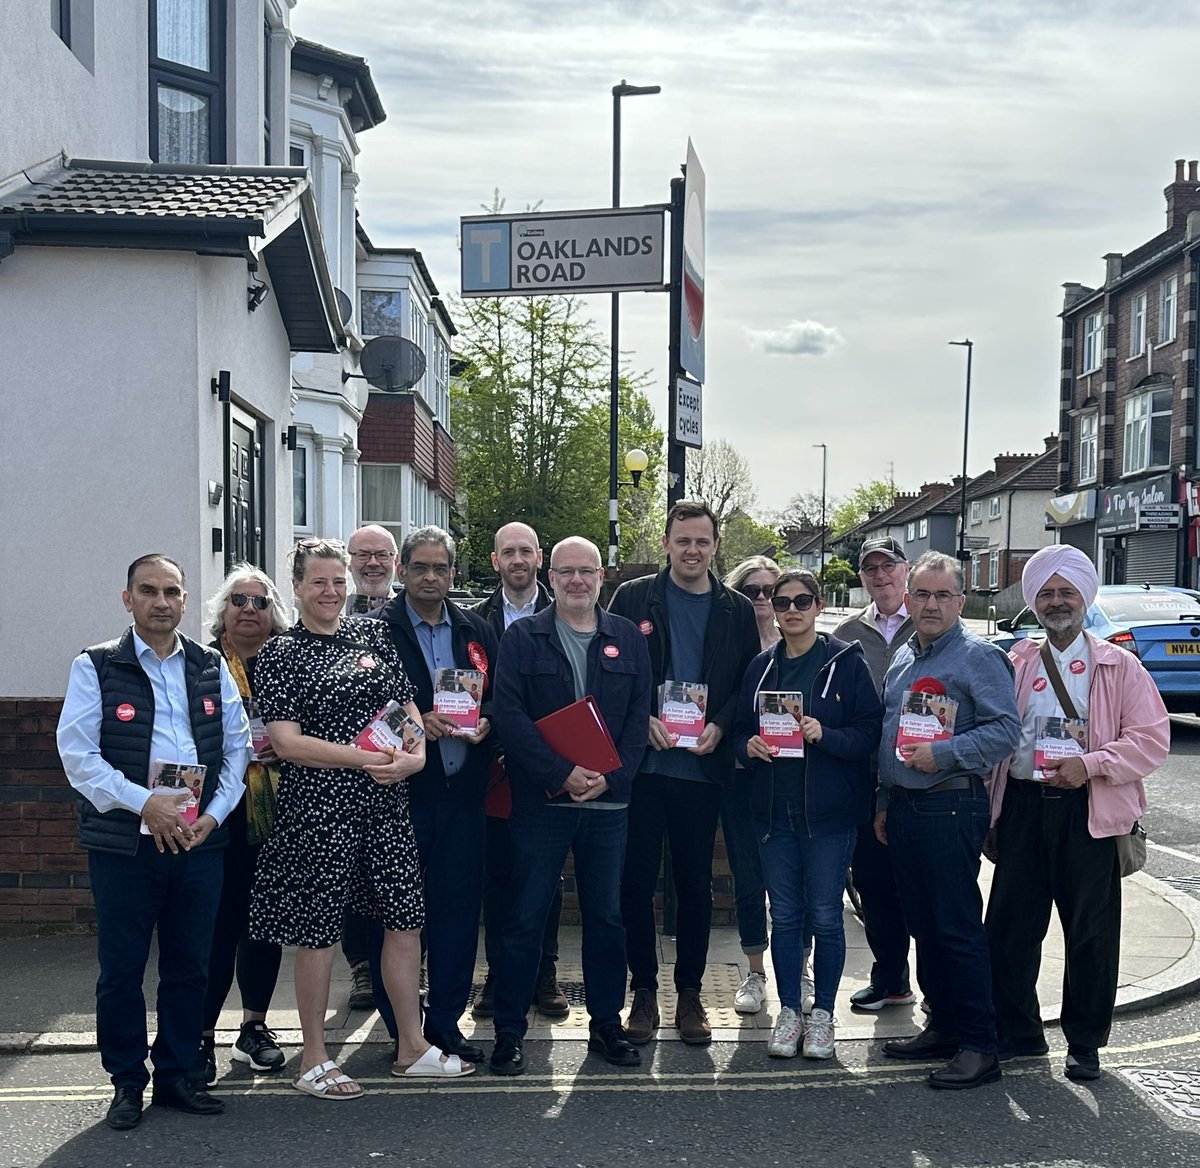 Positive session in #HanwellBroadway this morning. Lots of conversations and support for @SadiqKhan and @BassamMahfouz. Remember to take photo ID to vote on May 2 🗳️🌹